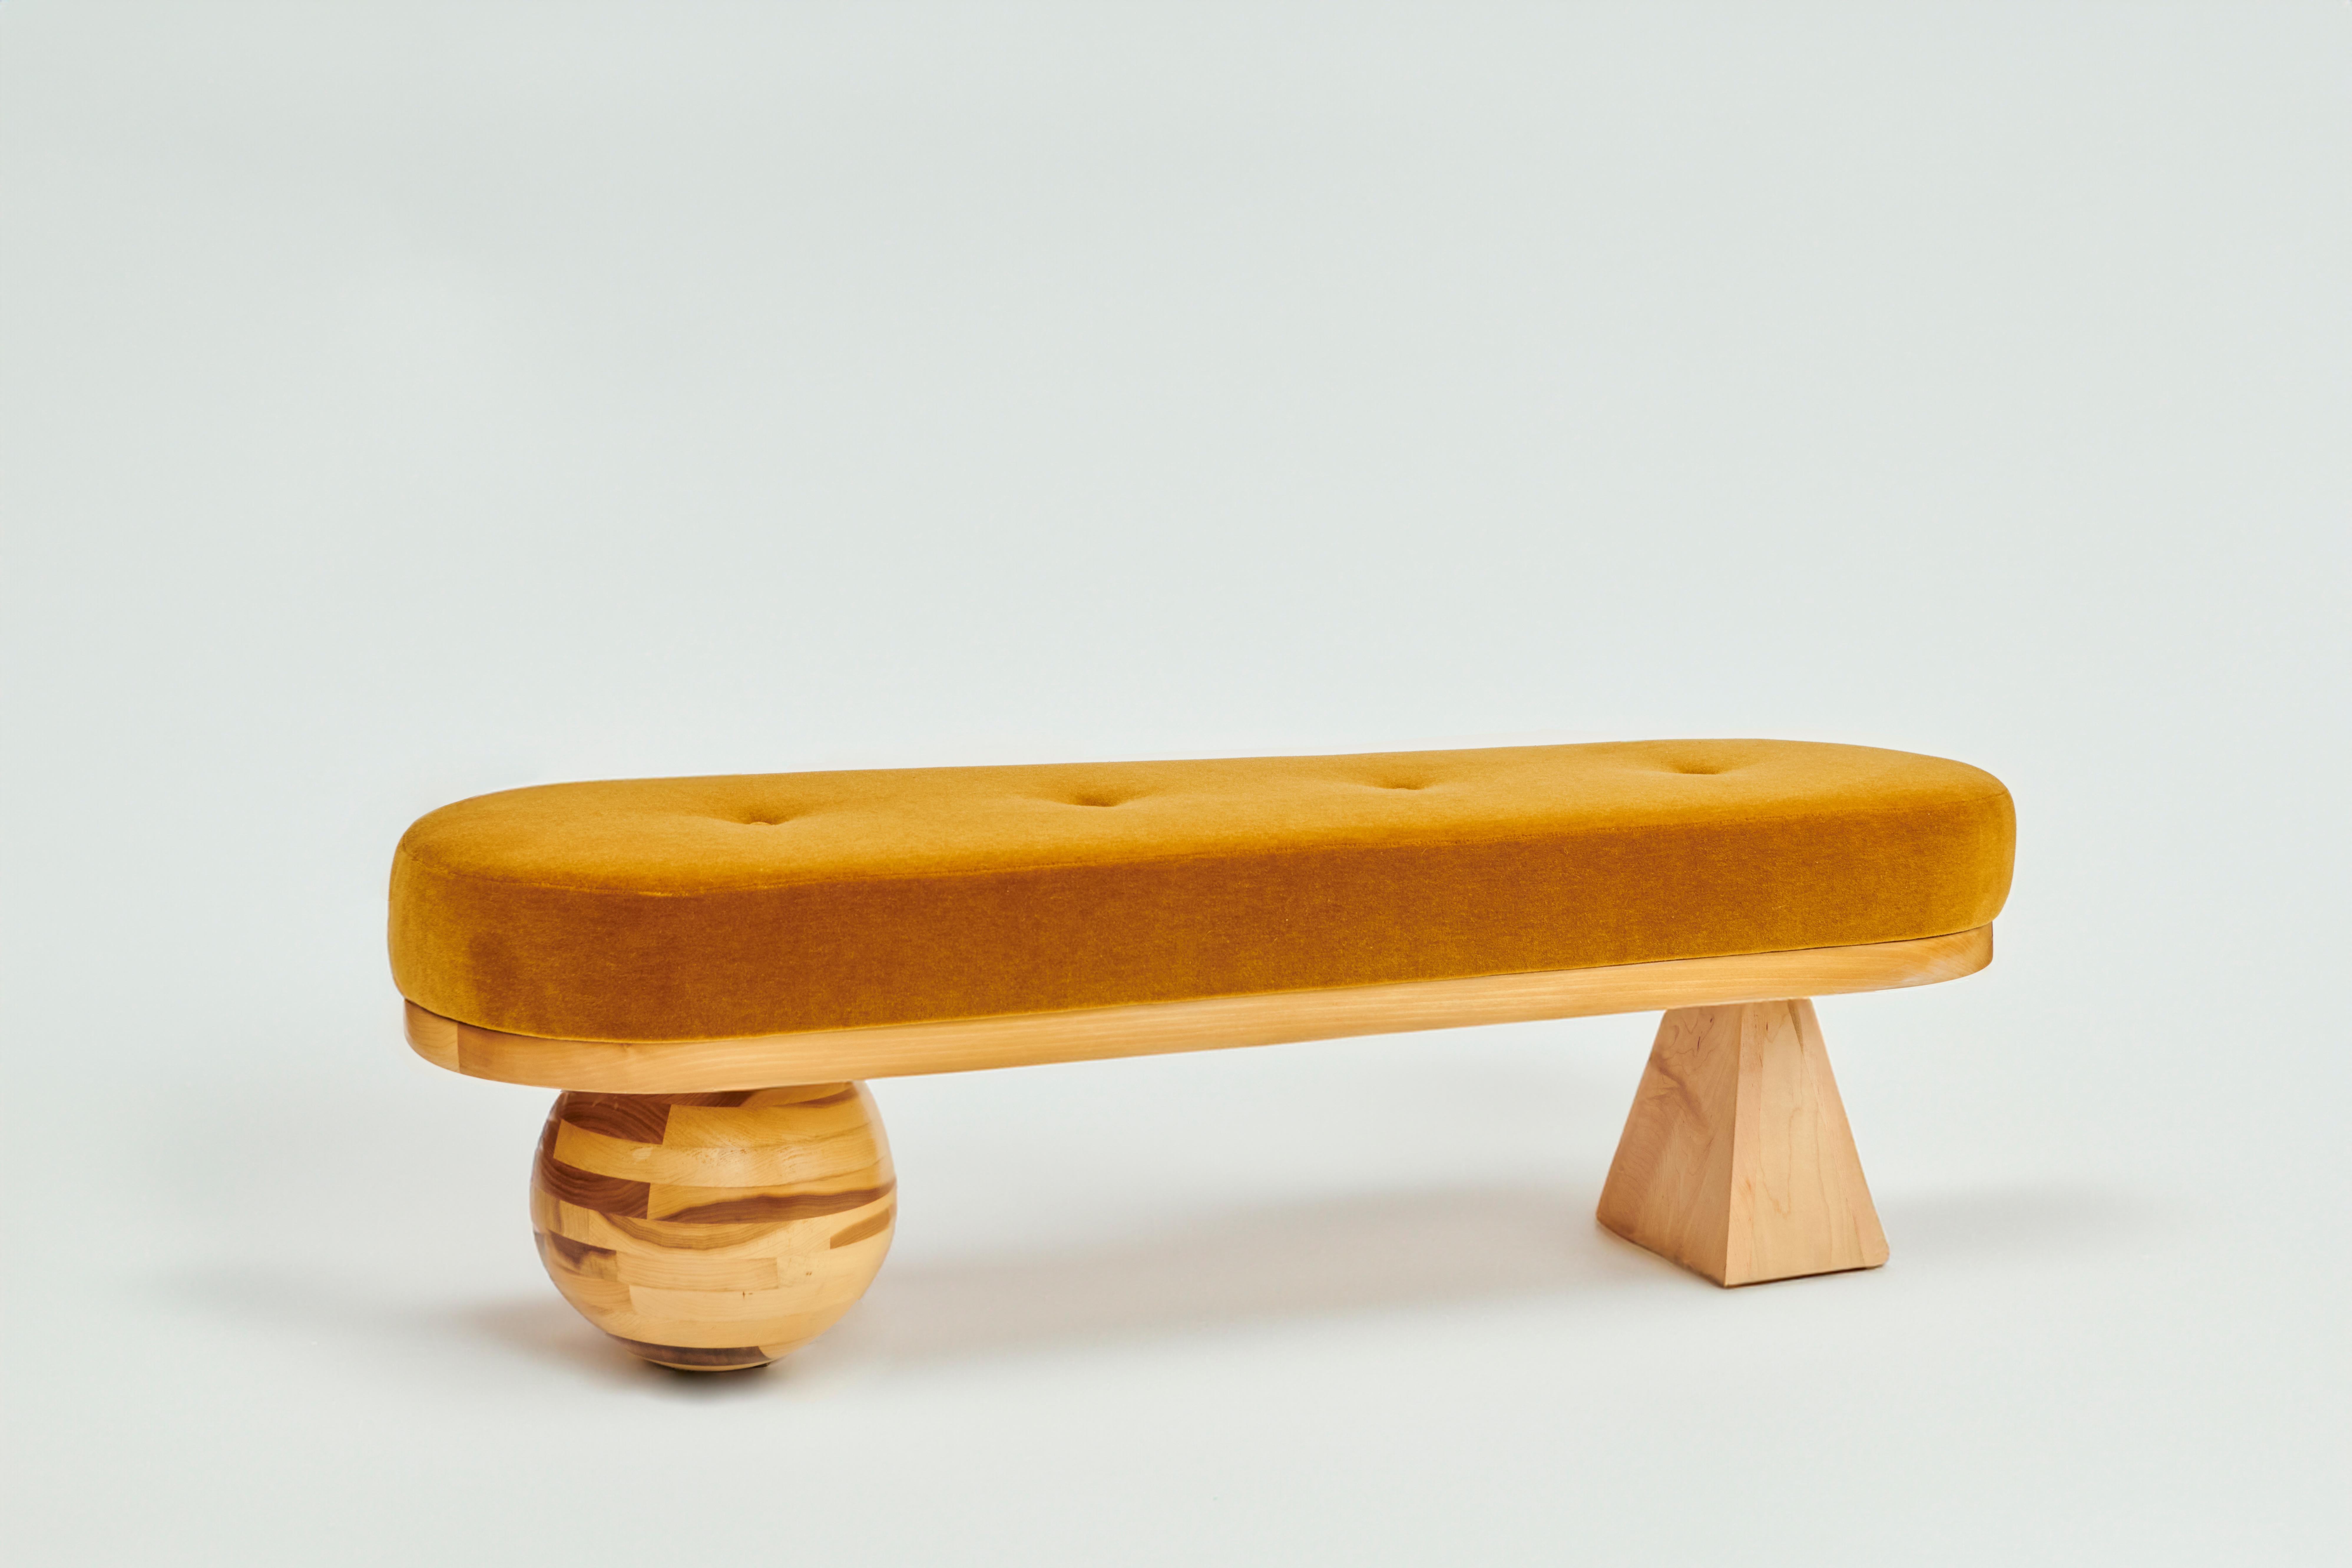 Made to order mohair and maple bench designed by Christian Siriano.

Fabric: Camel Mohair  (available in custom fabric)

Base: Natural Maple (available in custom finish)

Dimensions: 
Overall Width: 58” 
Overall Depth: 18” 
Overall Height: 19”
Base